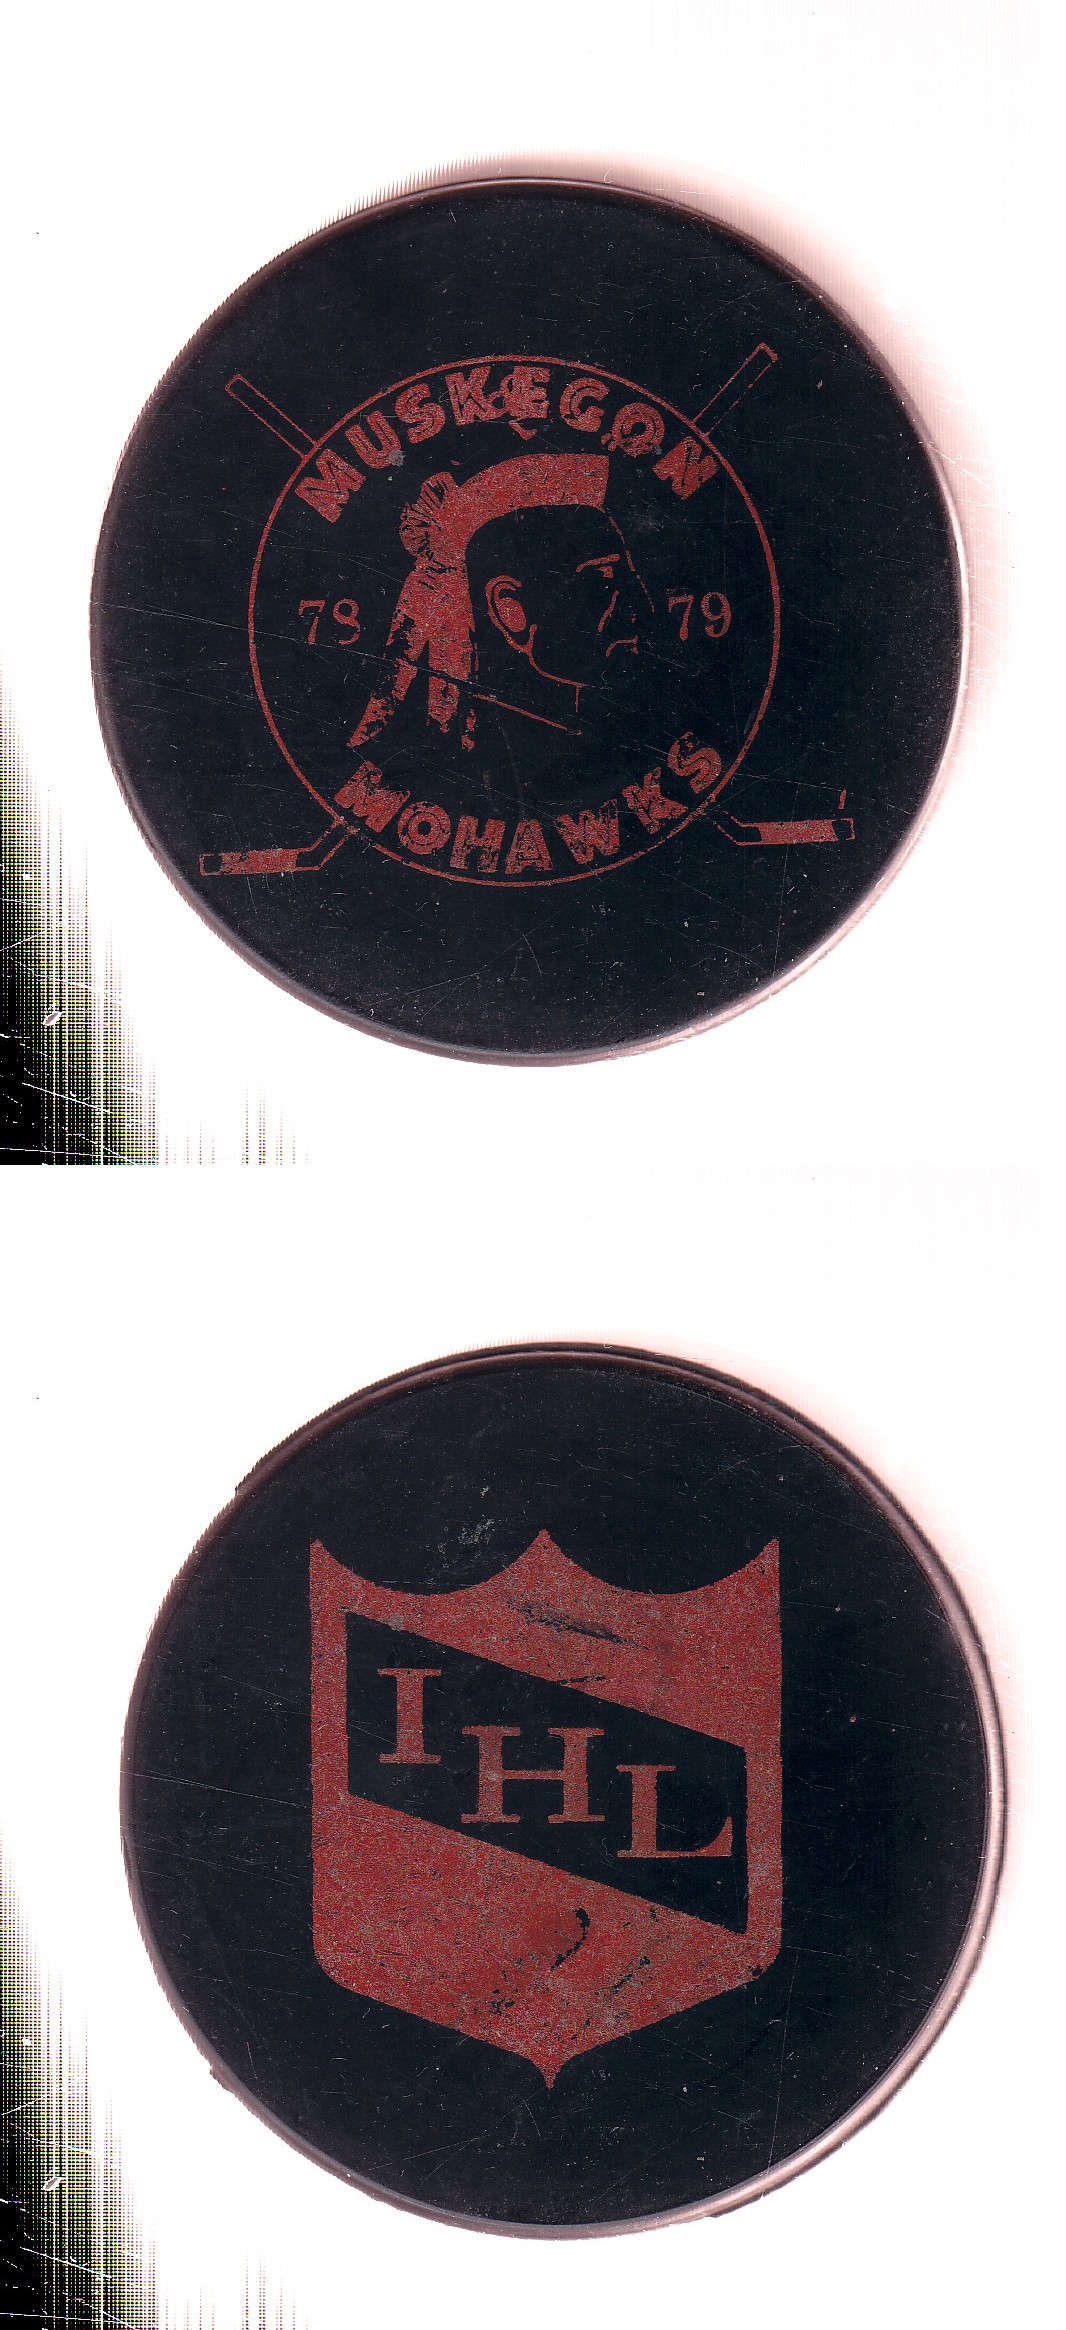 1978-79 VICEROY MUSKEGON MOHAWKS GAME PUCK photo